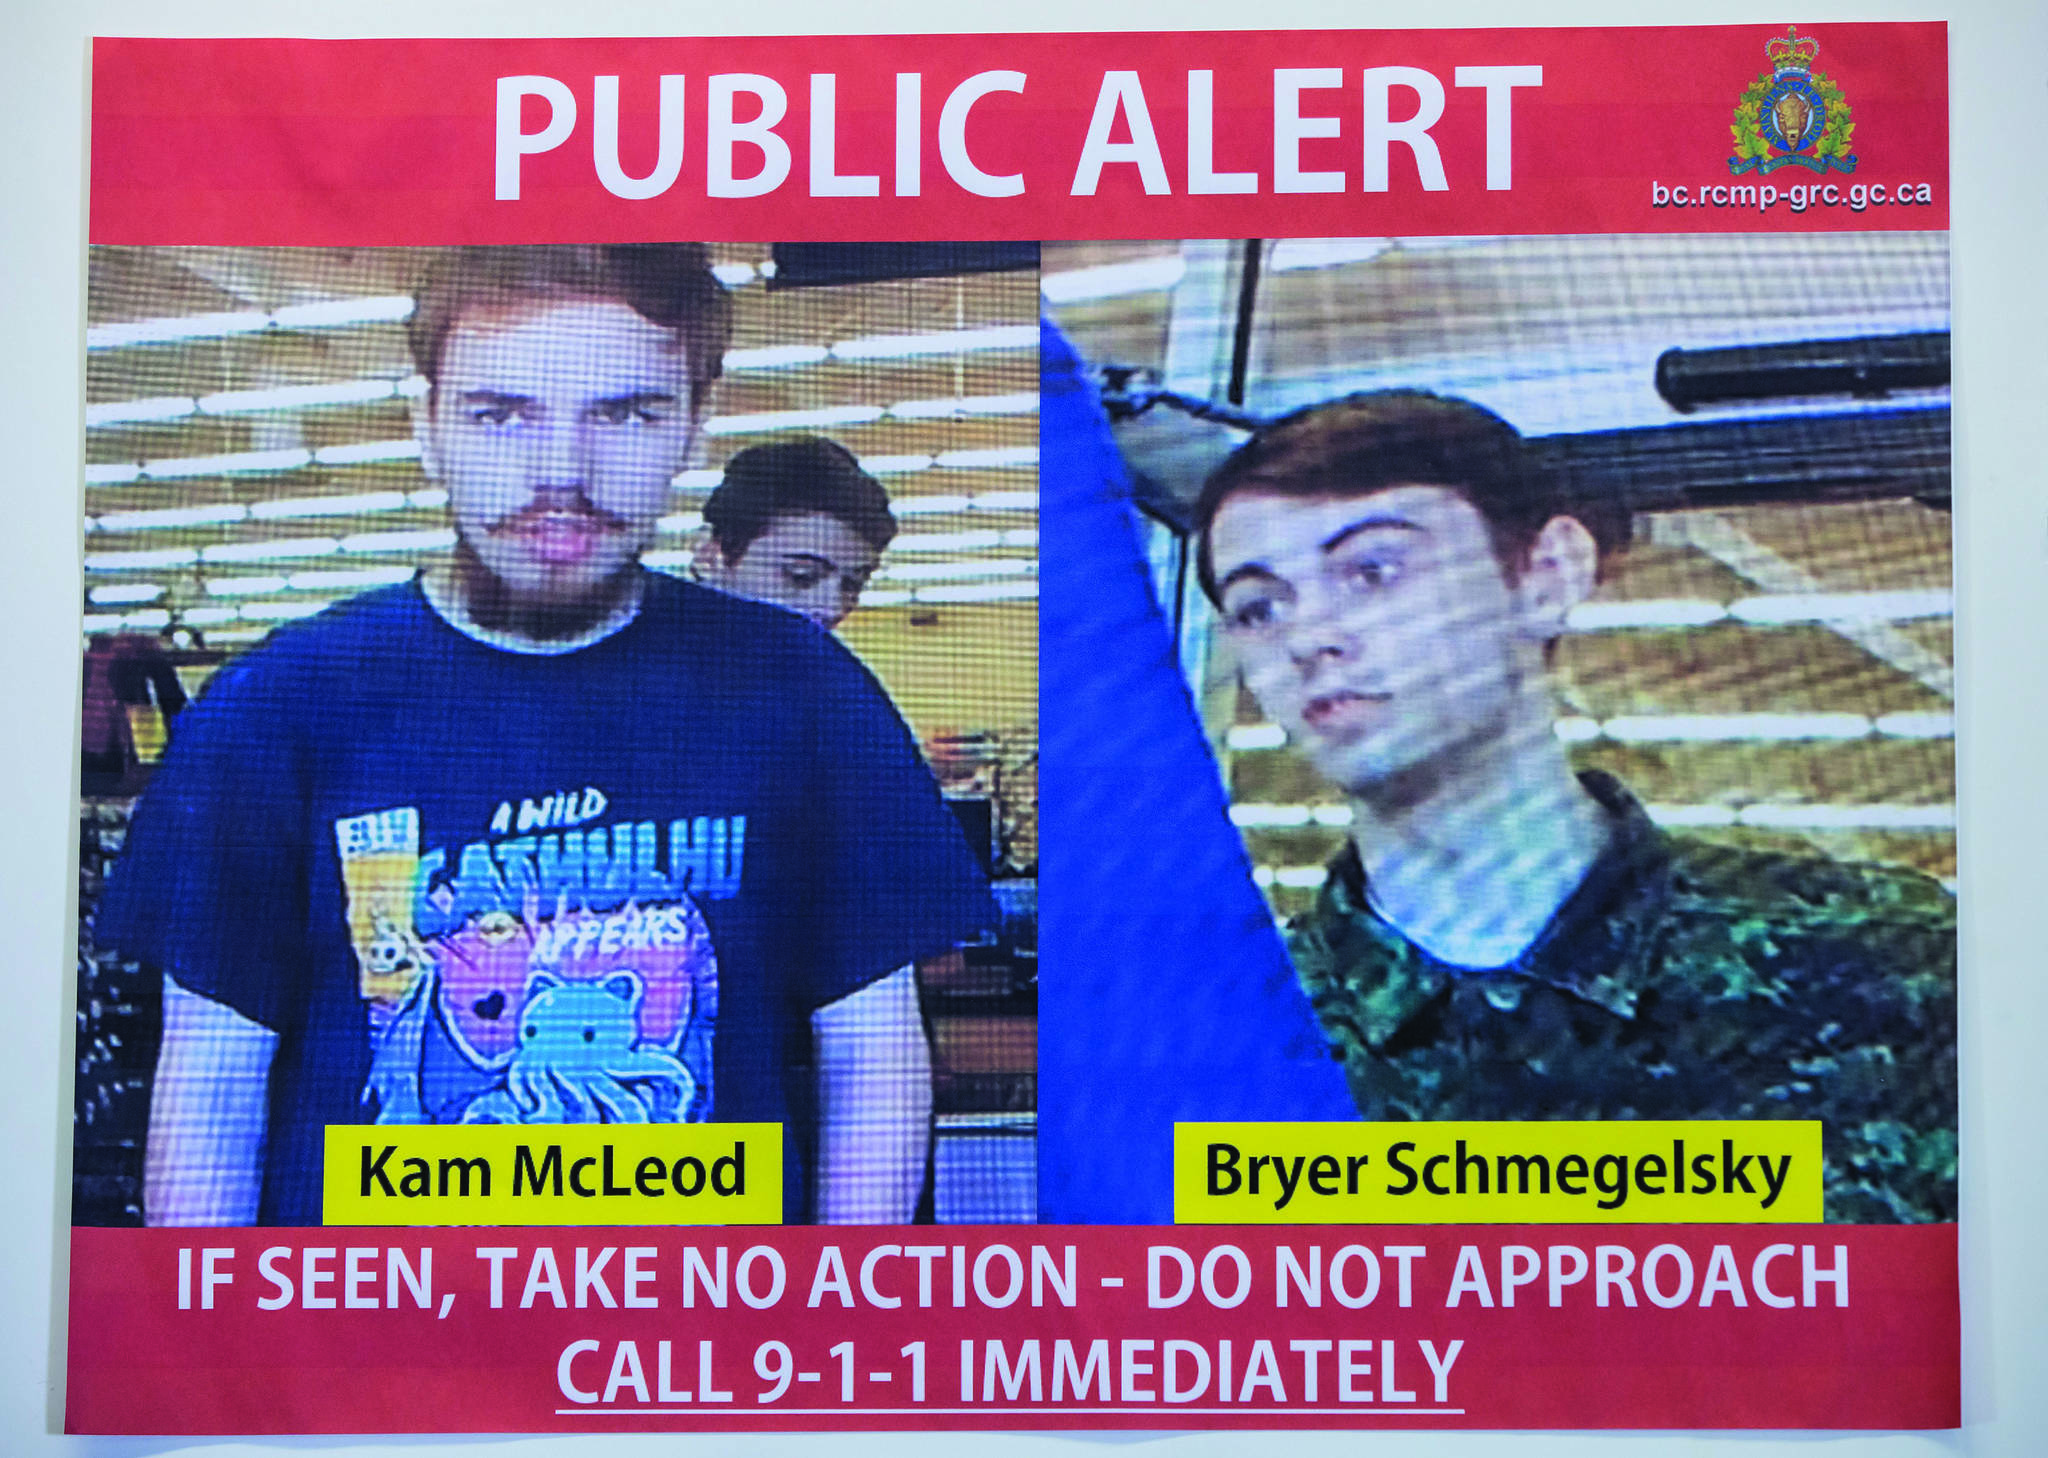 Security camera images recorded in Saskatchewan of Kam McLeod, 19, and Bryer Schmegelsky, 18, are displayed during an RCMP news conference in Surrey, B.C., on Tuesday July 23, 2019. THE CANADIAN PRESS/Darryl Dyck